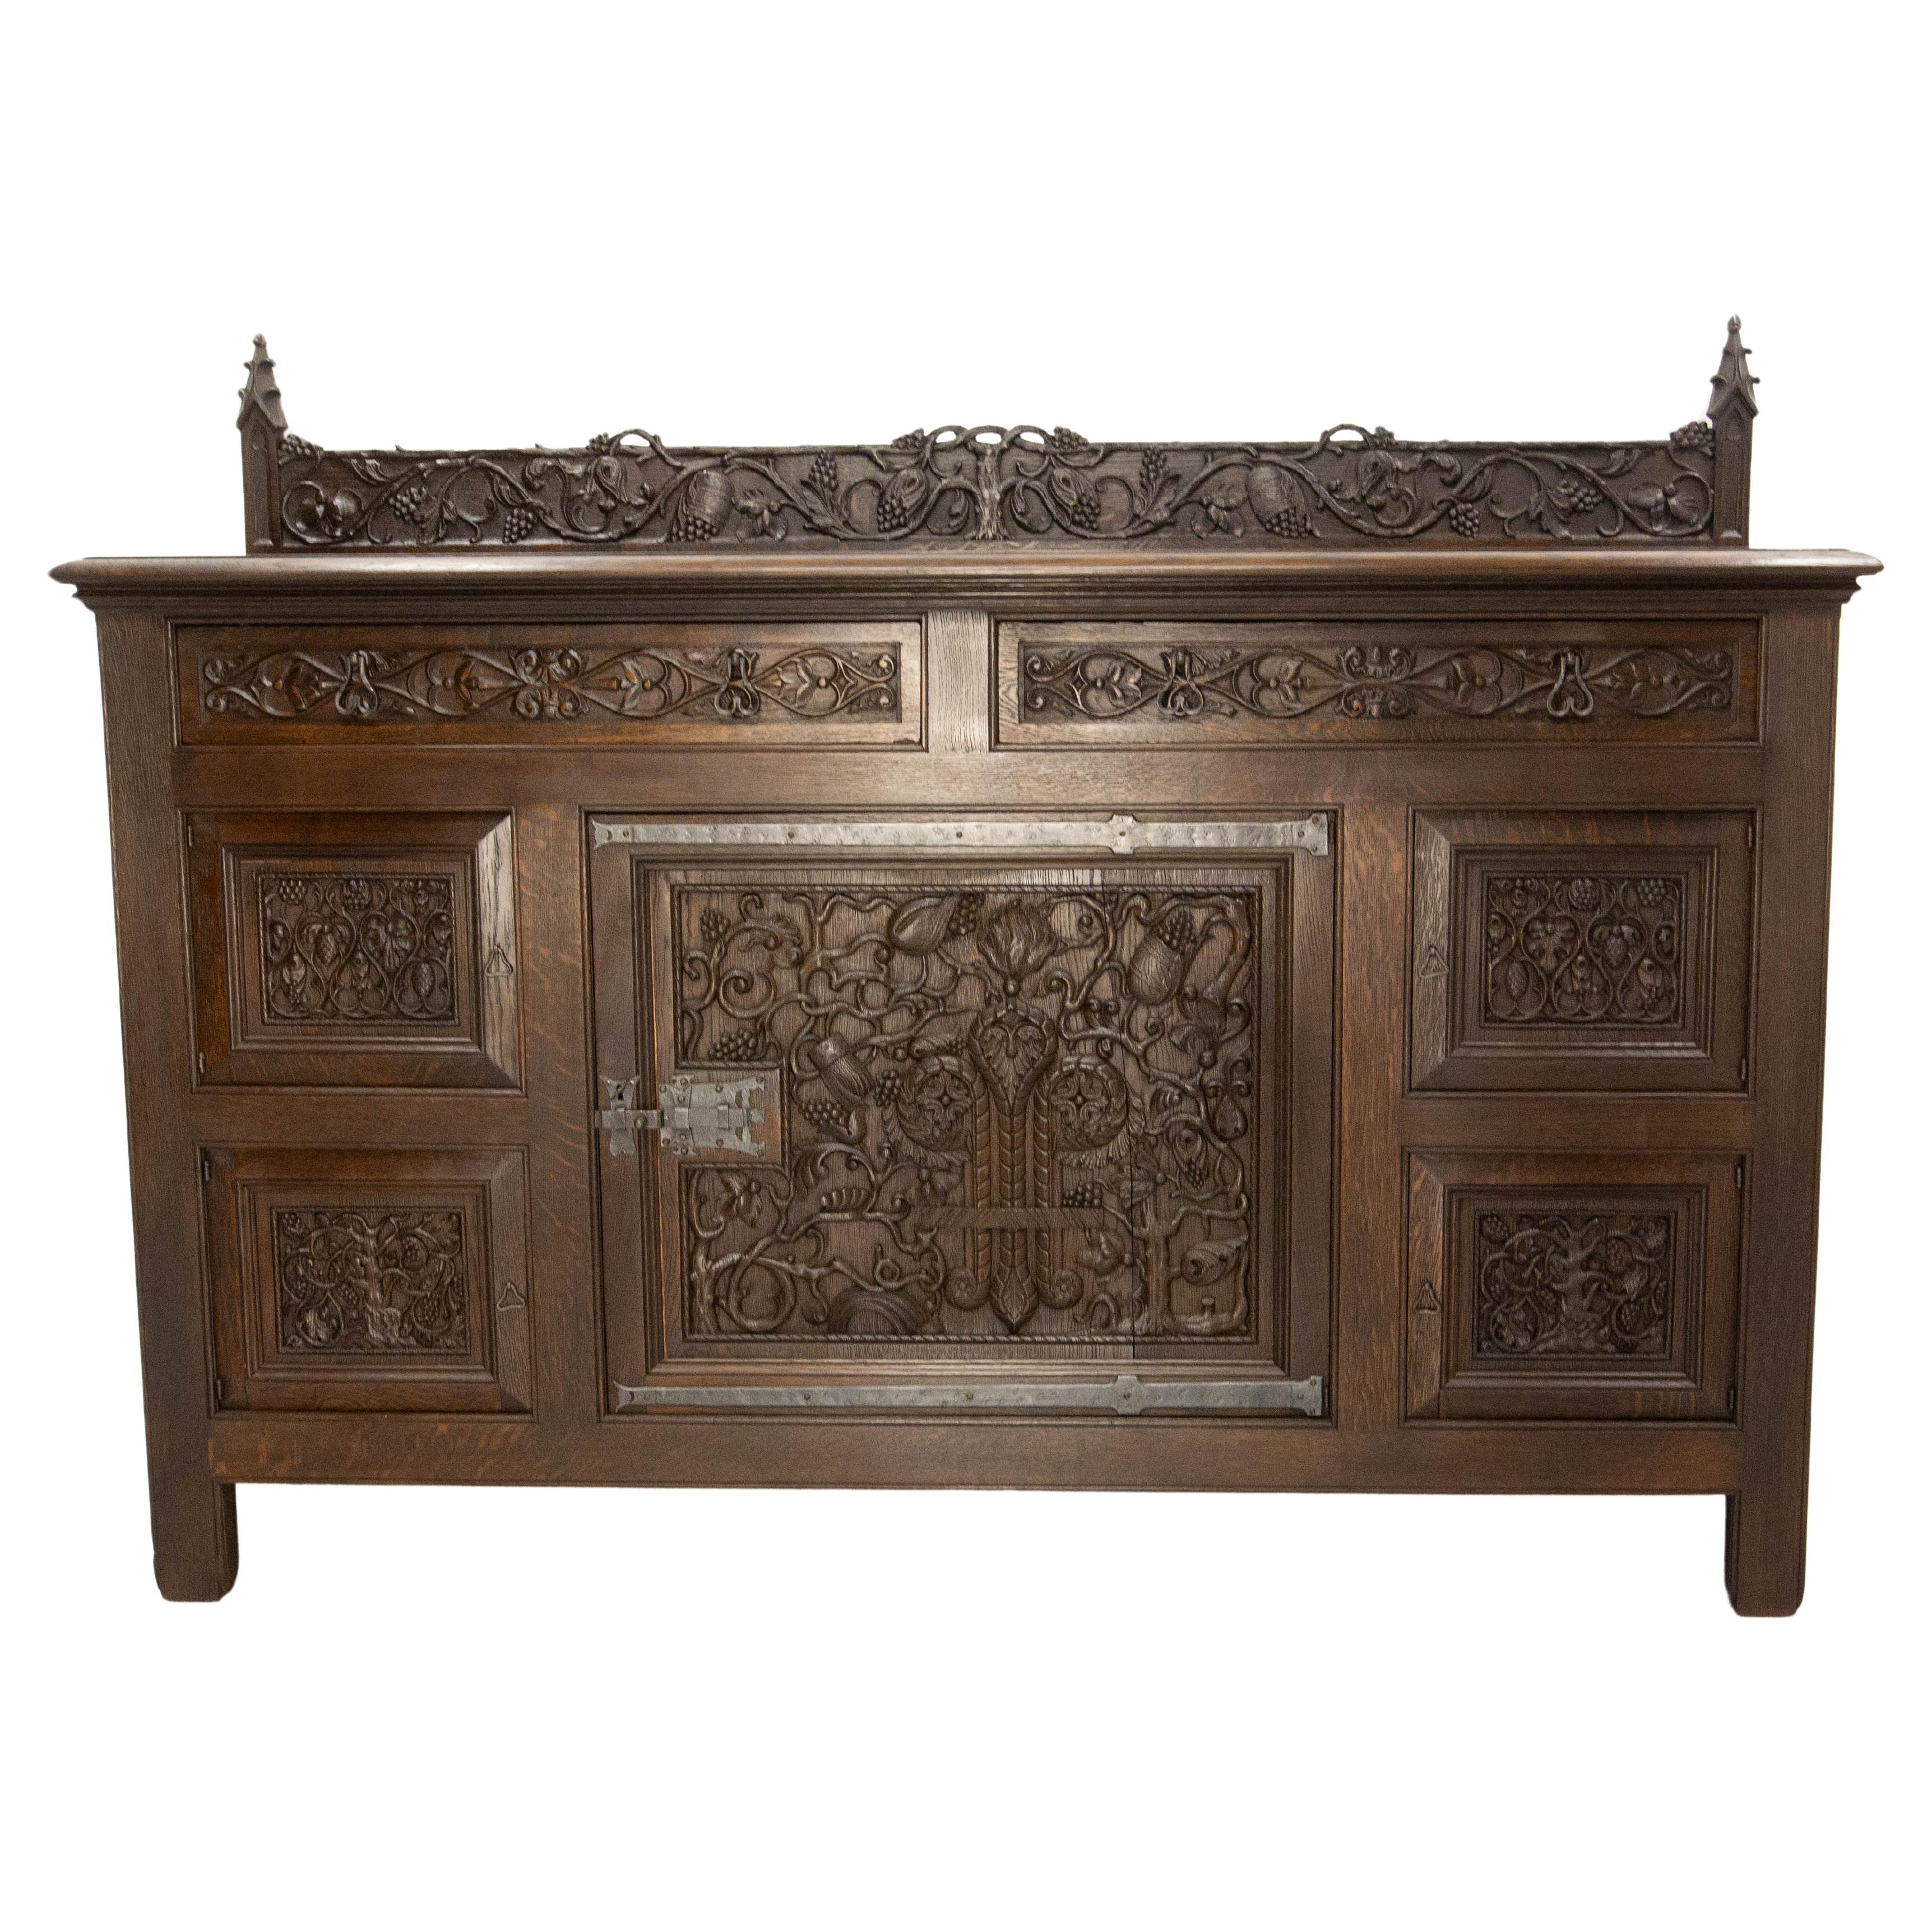 French Oak & Wrought Iron Buffet Neogothic St Tree of Life Theme Early 20th C For Sale